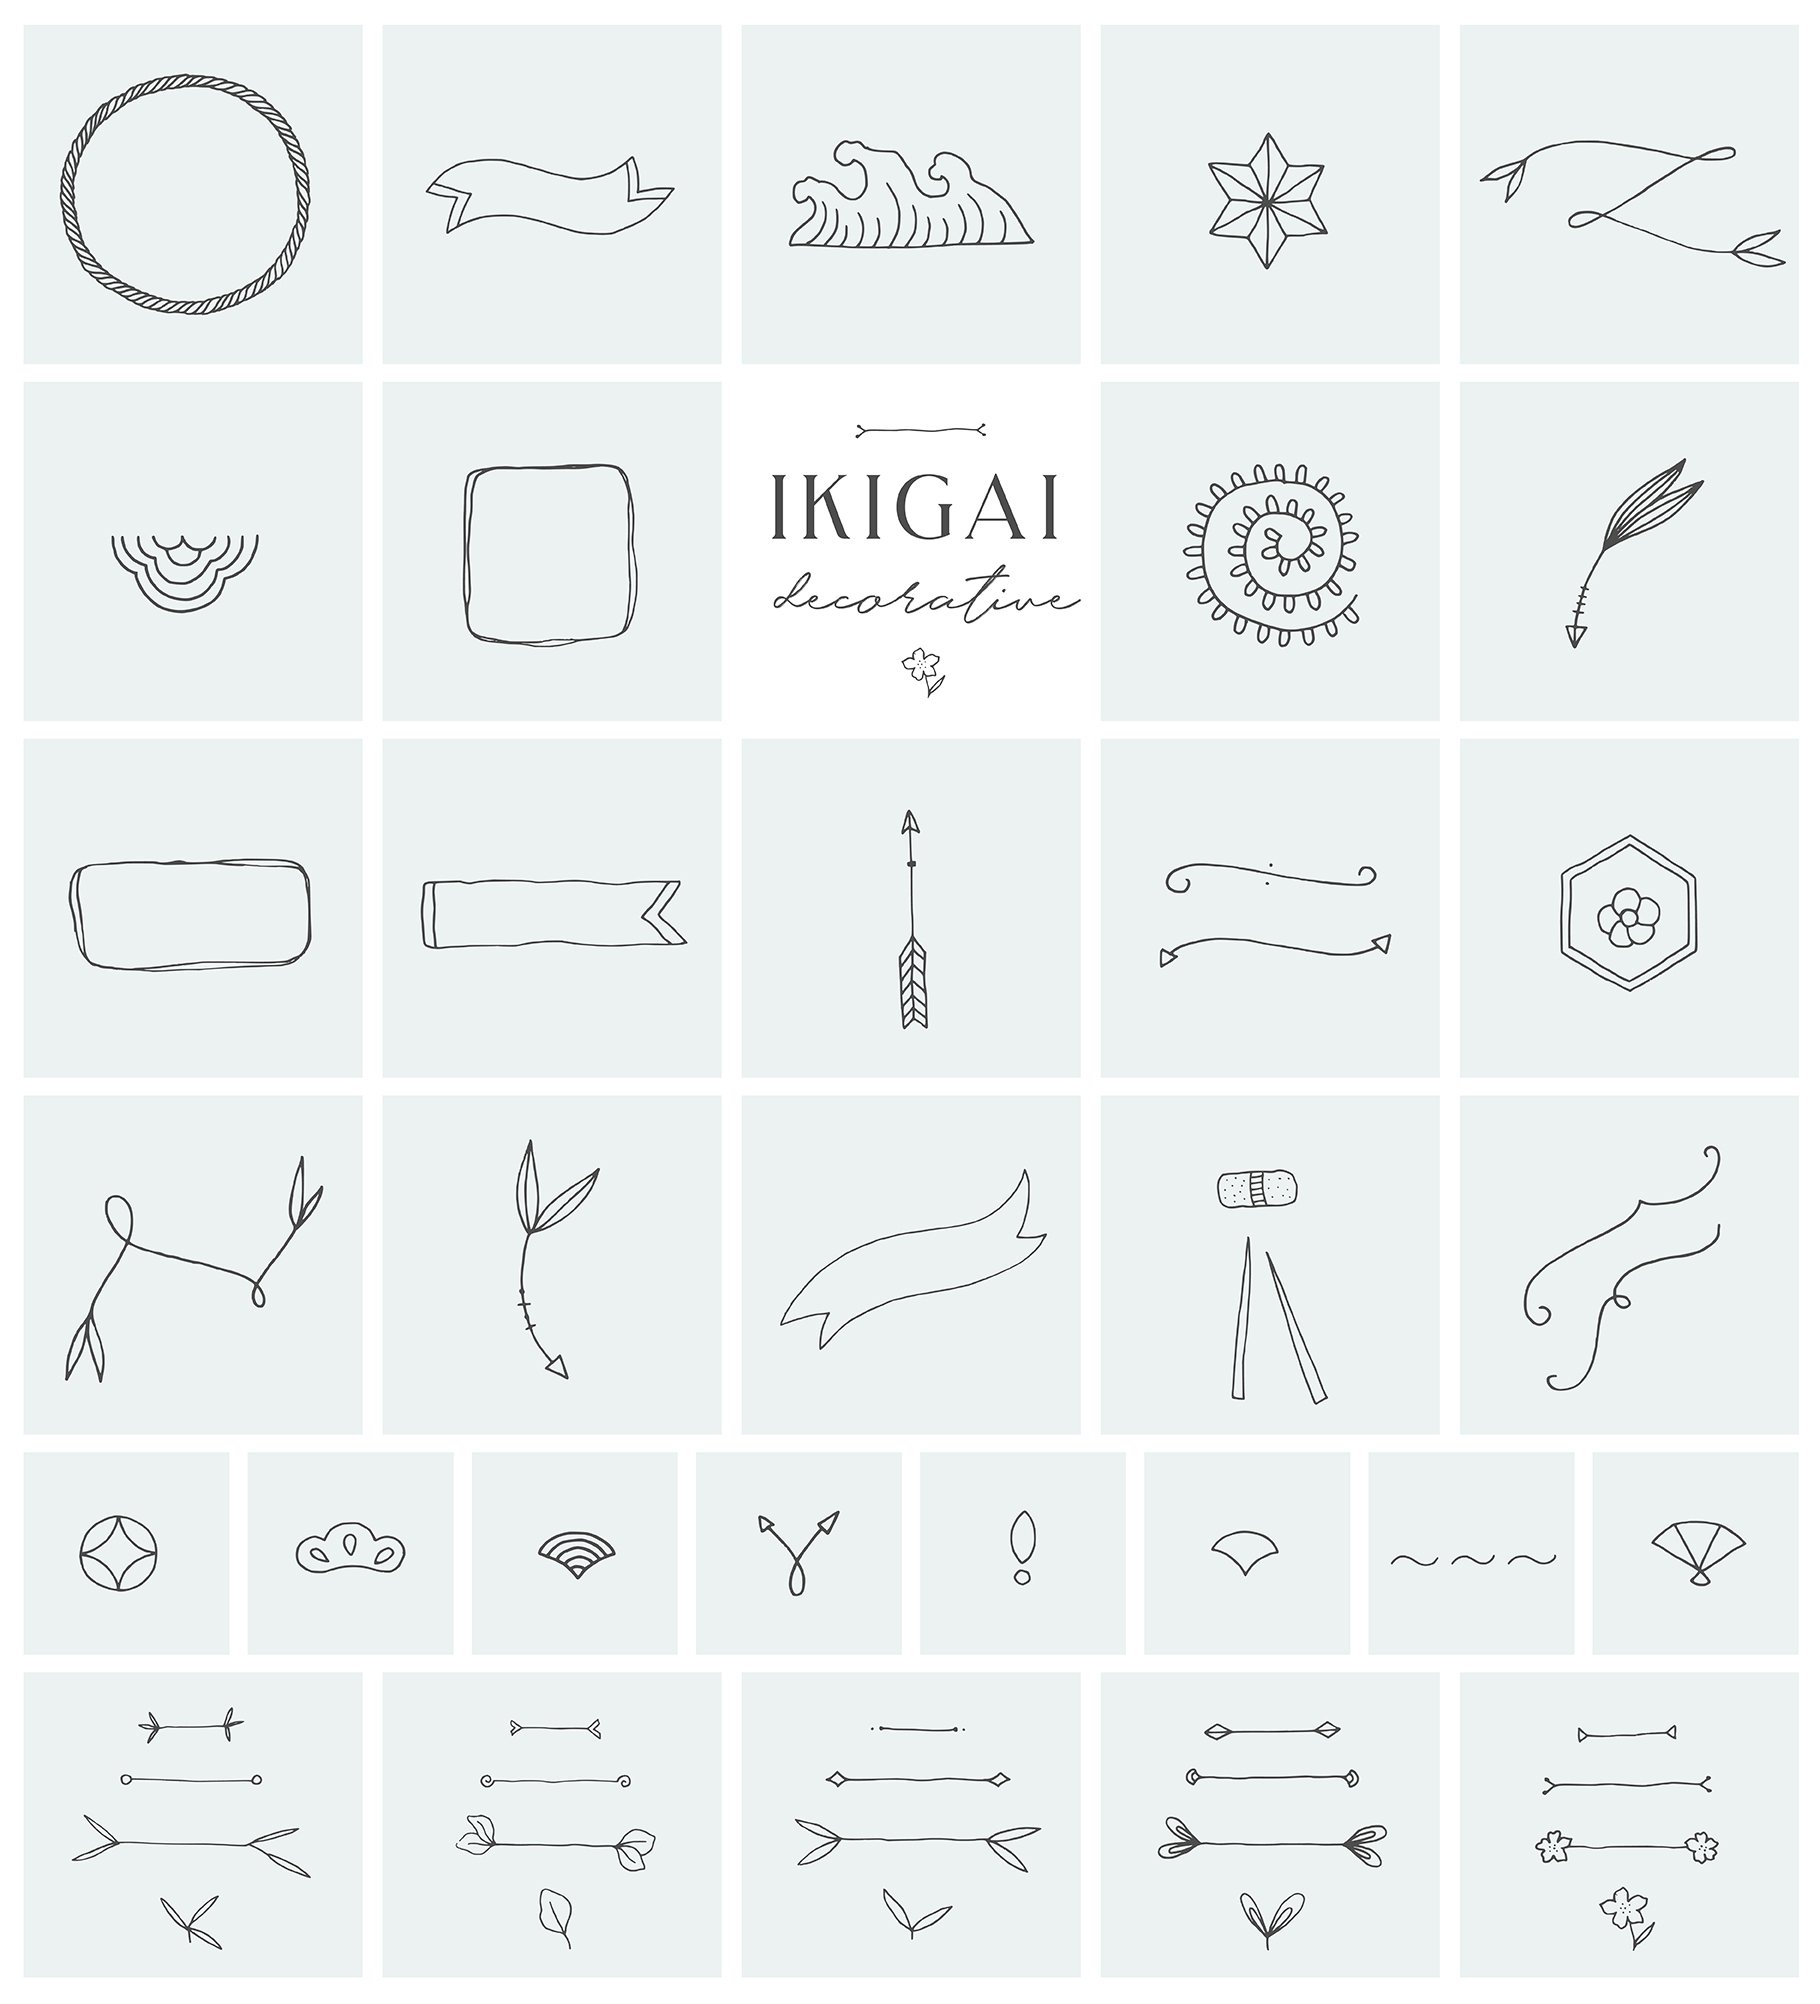 Ikigai Japanese Logo and Branding Collection